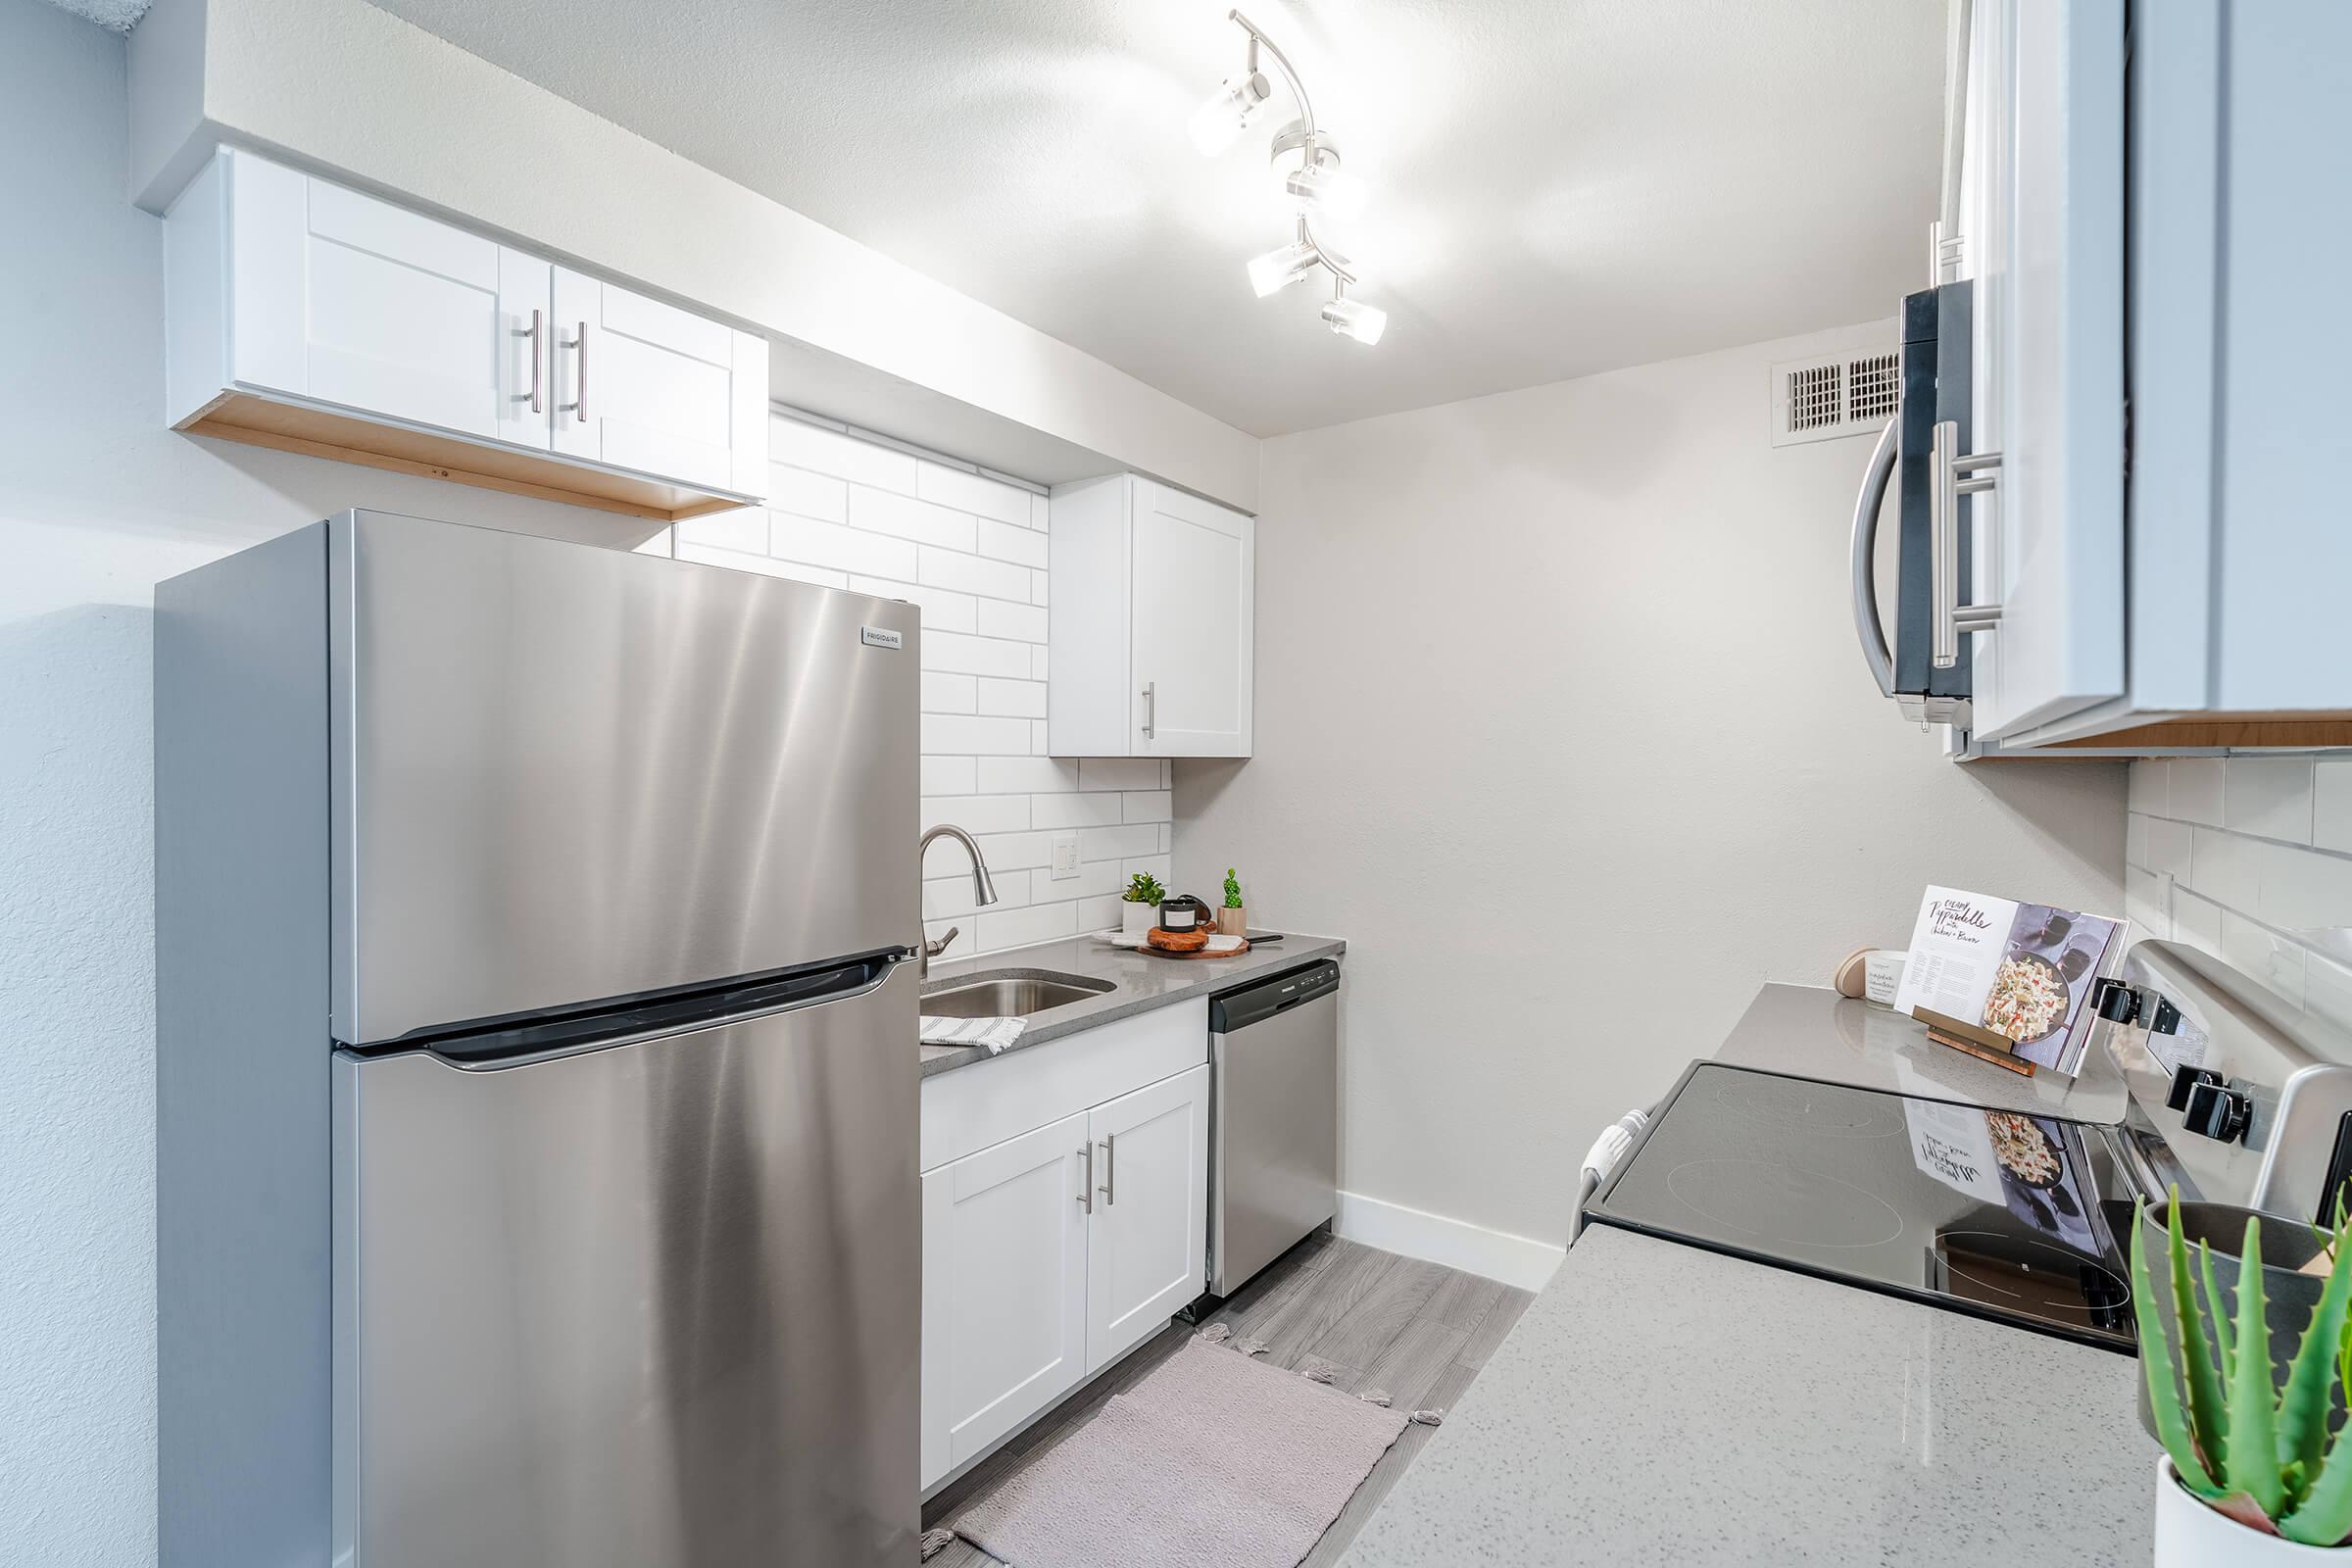 Galley way kitchen with white cabinets, white subway tile backsplash, and stainless steel appliances